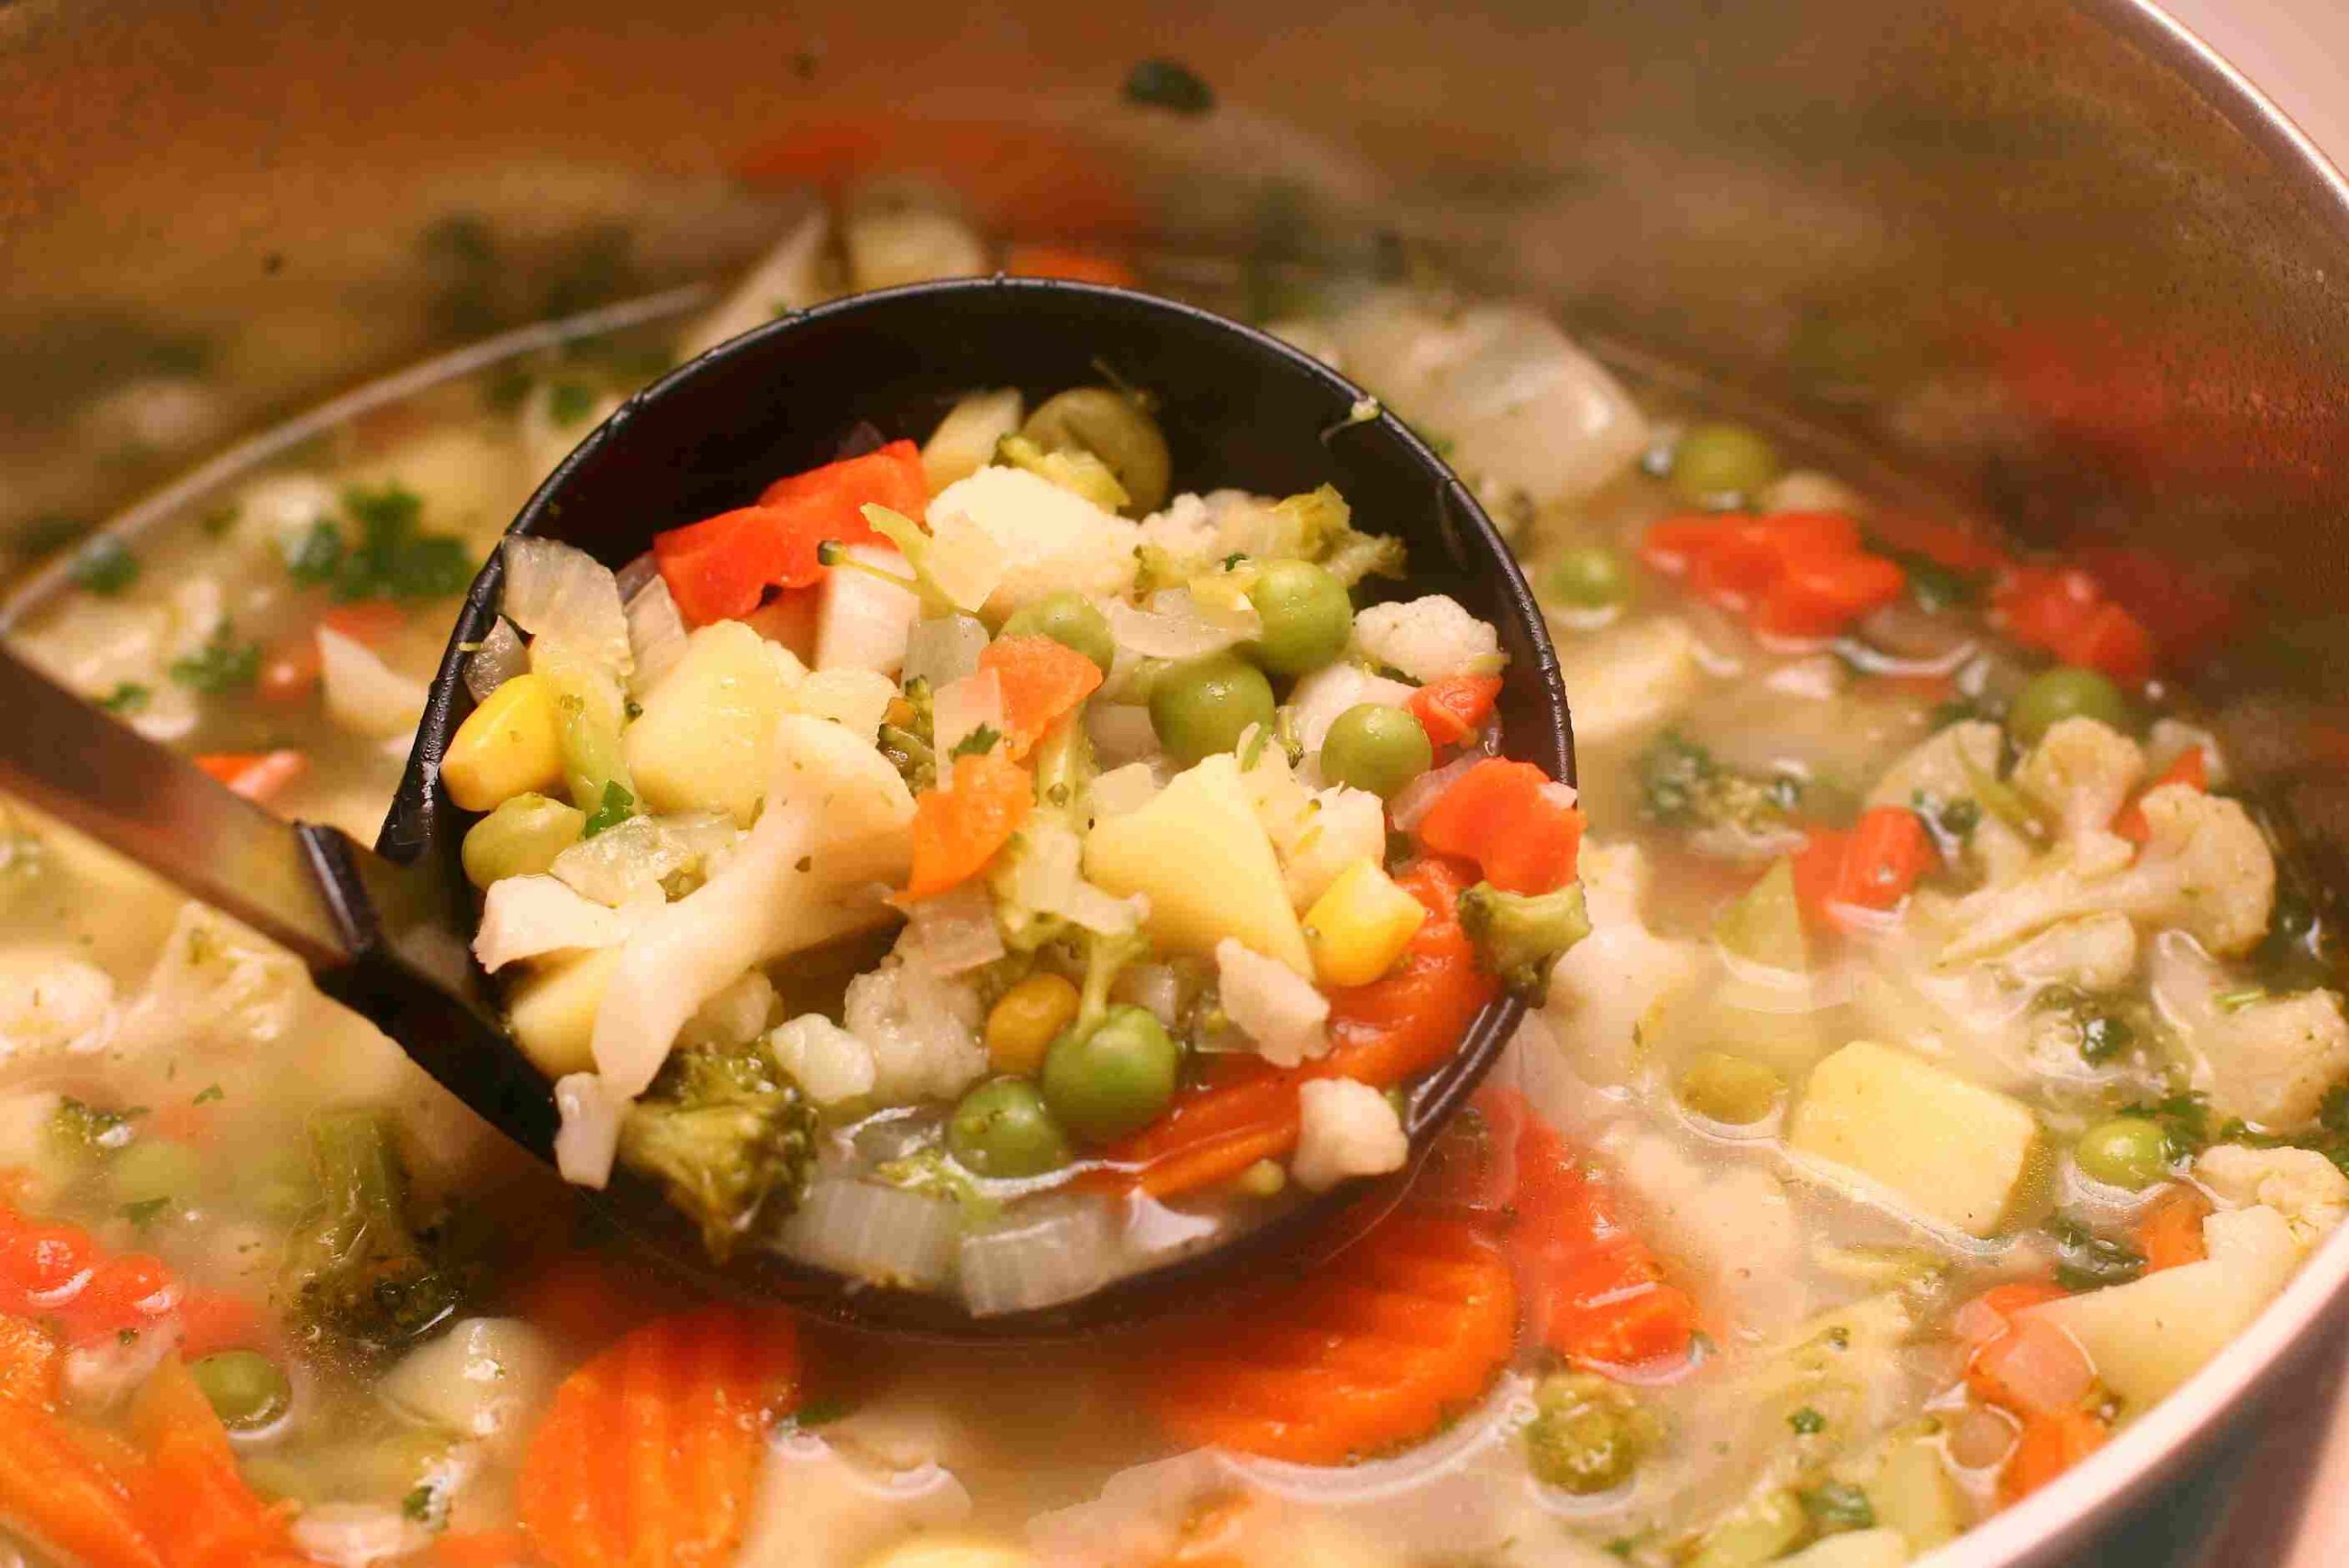 Healthy-Vegetable-Soup-Recipes-for-Weight-Loss